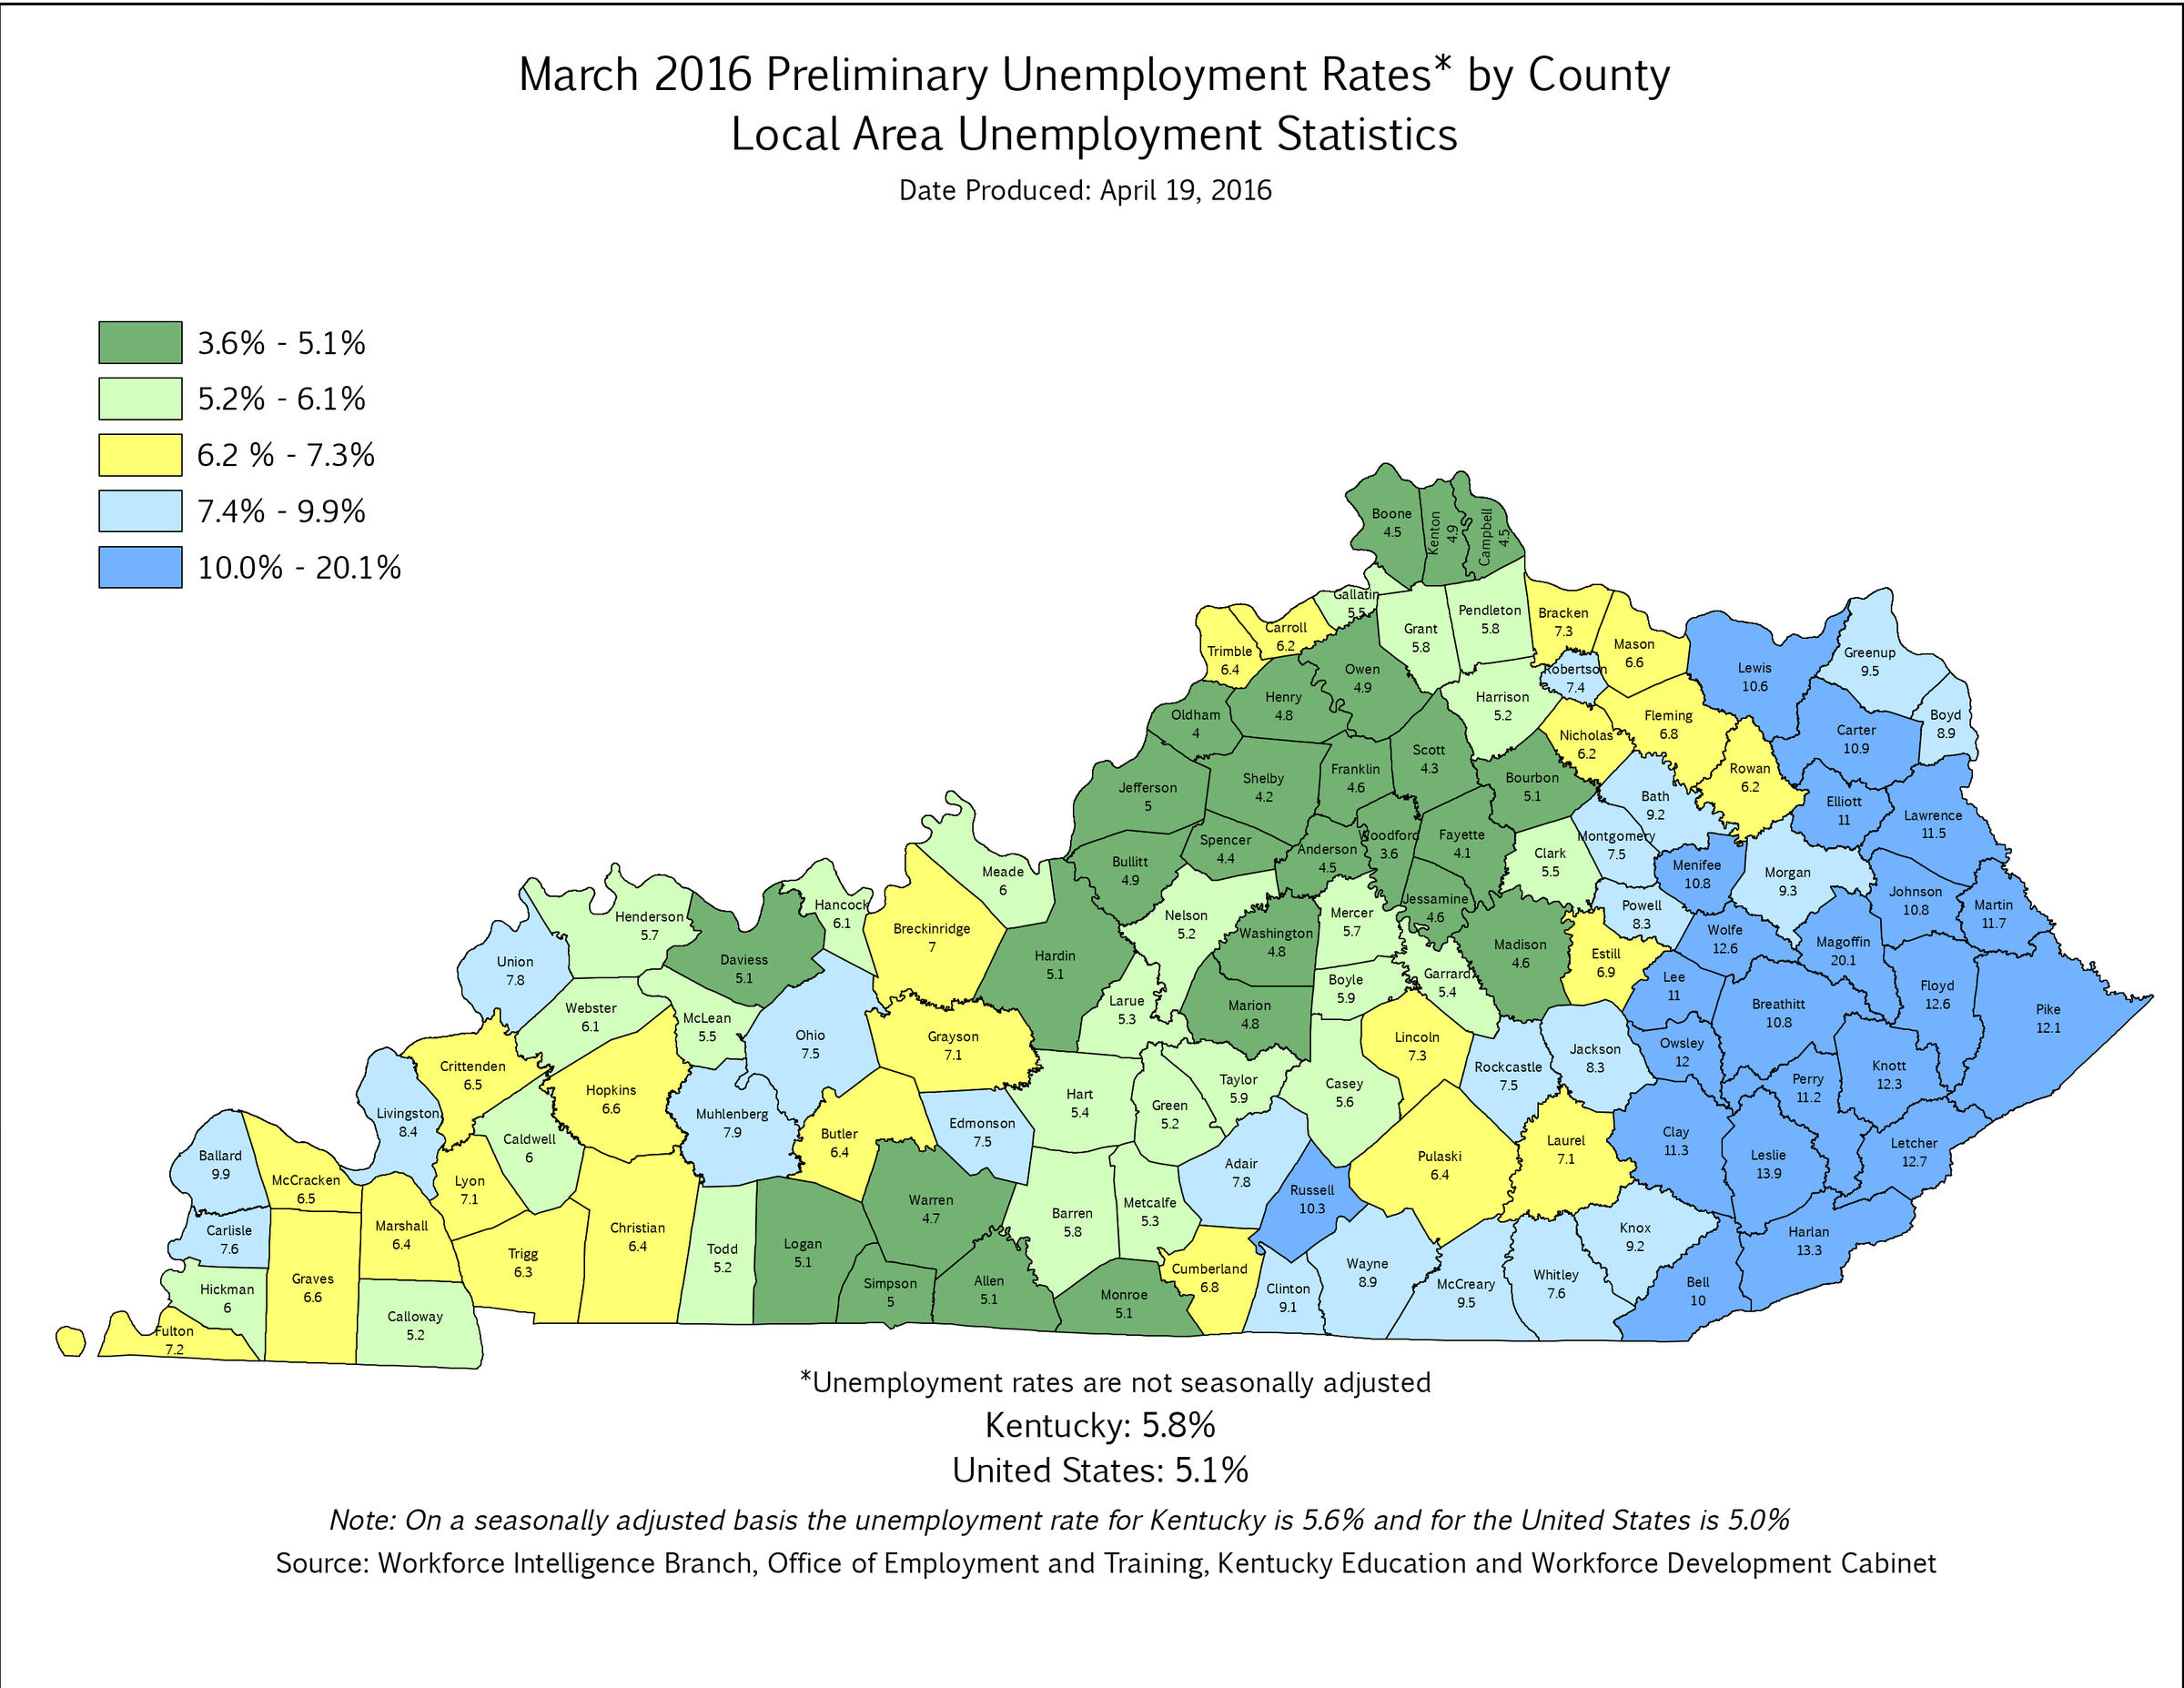 Unemployment Rates Higher than Average in Four Rivers Region WKMS